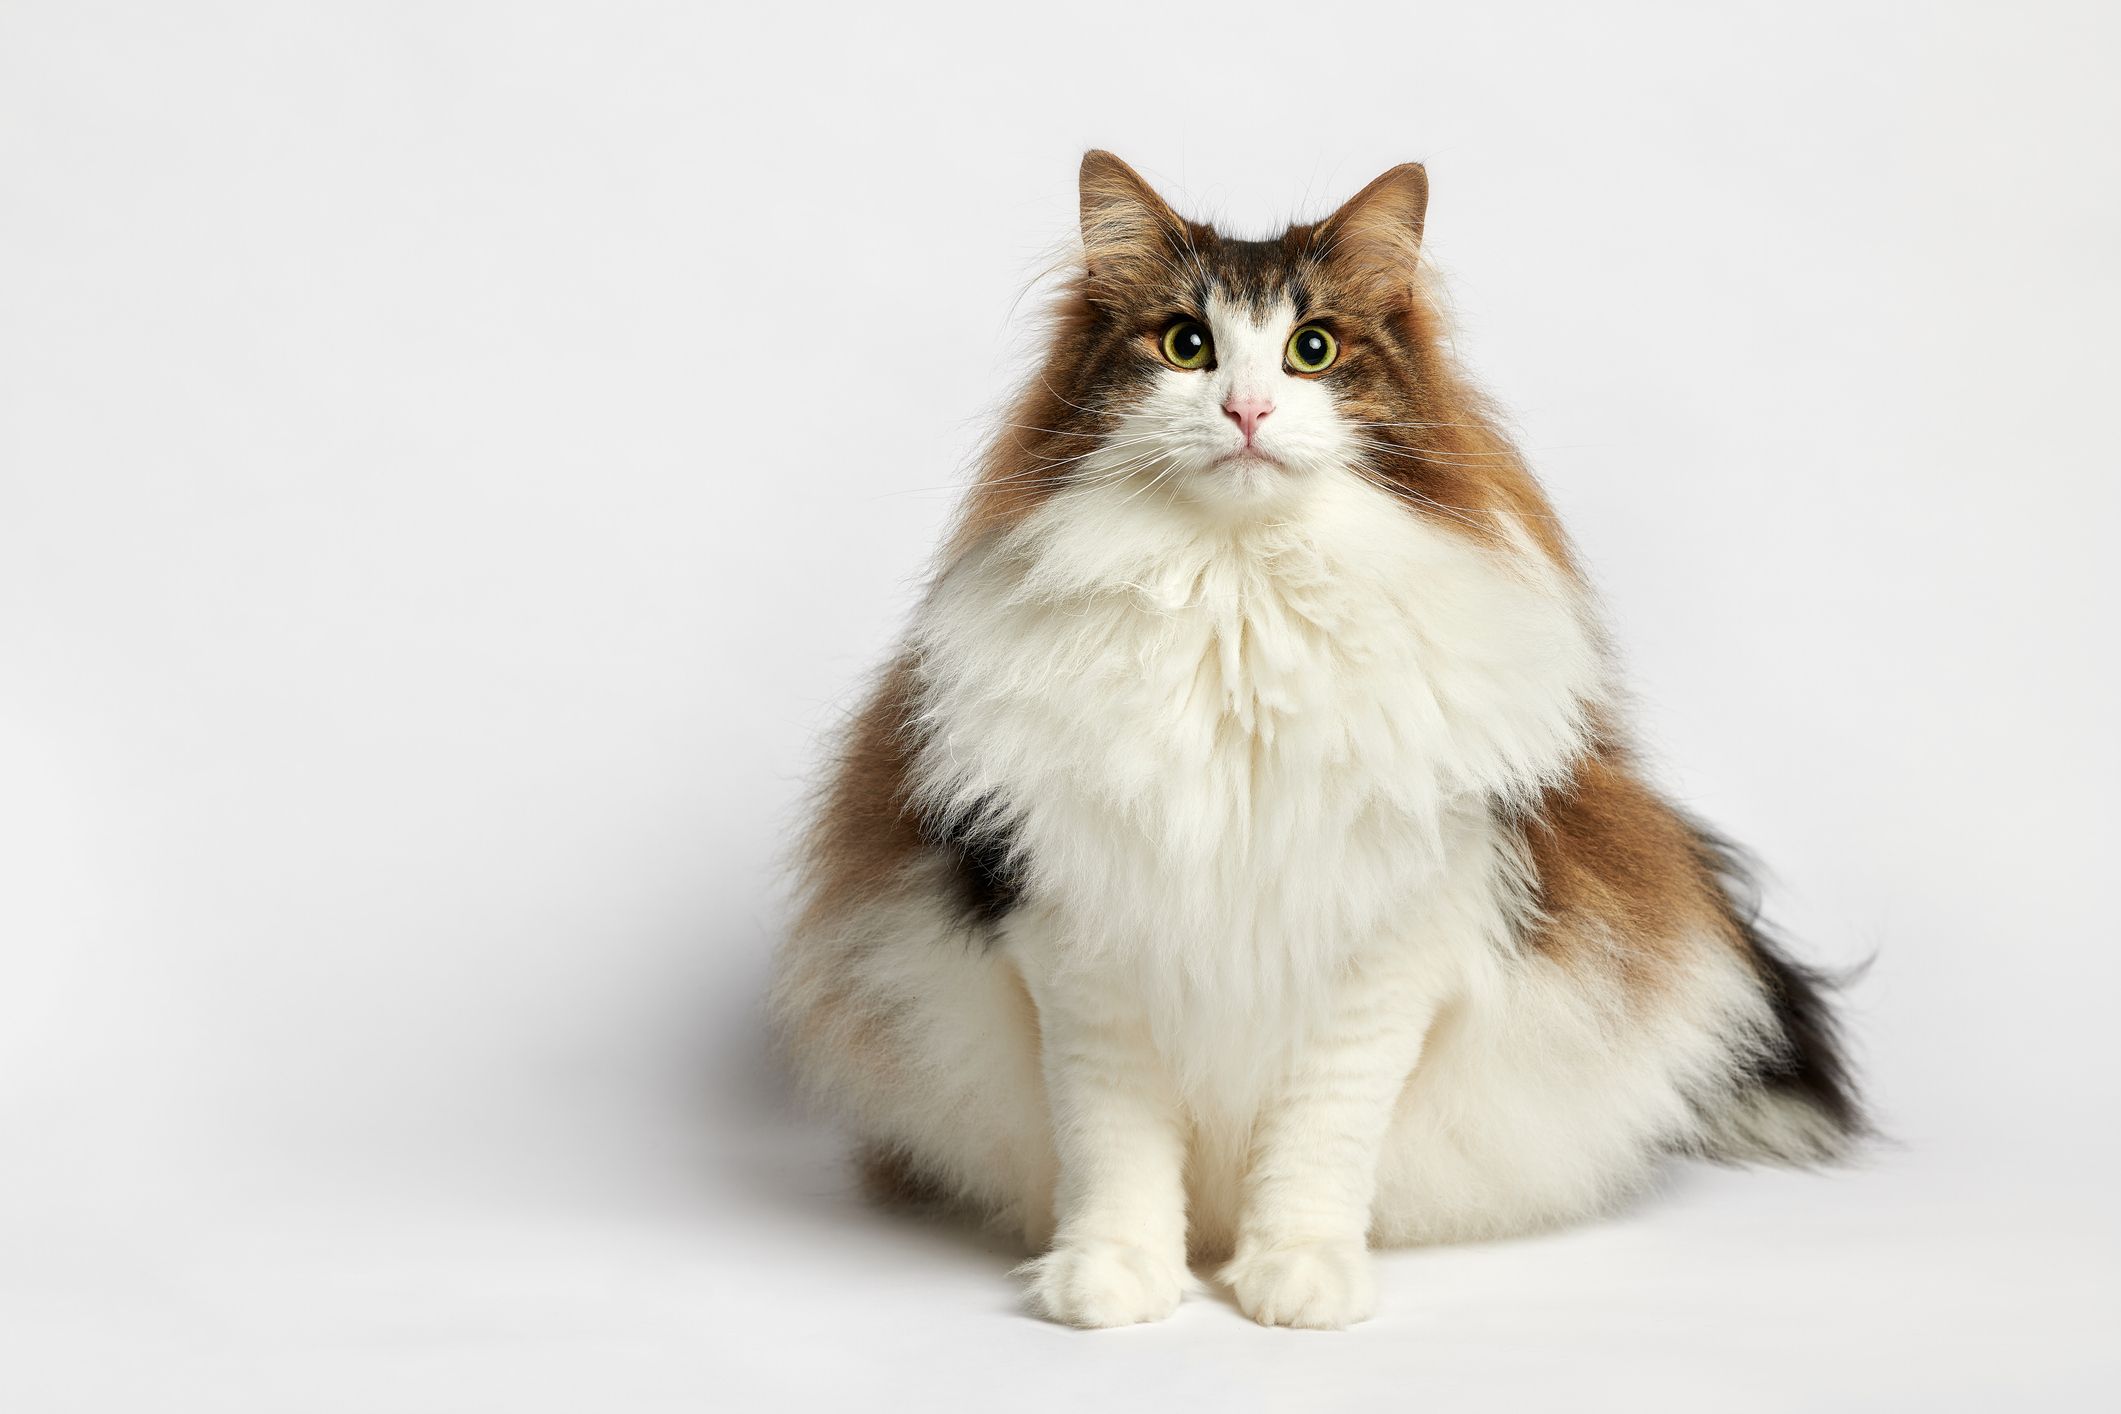 huge cats breed